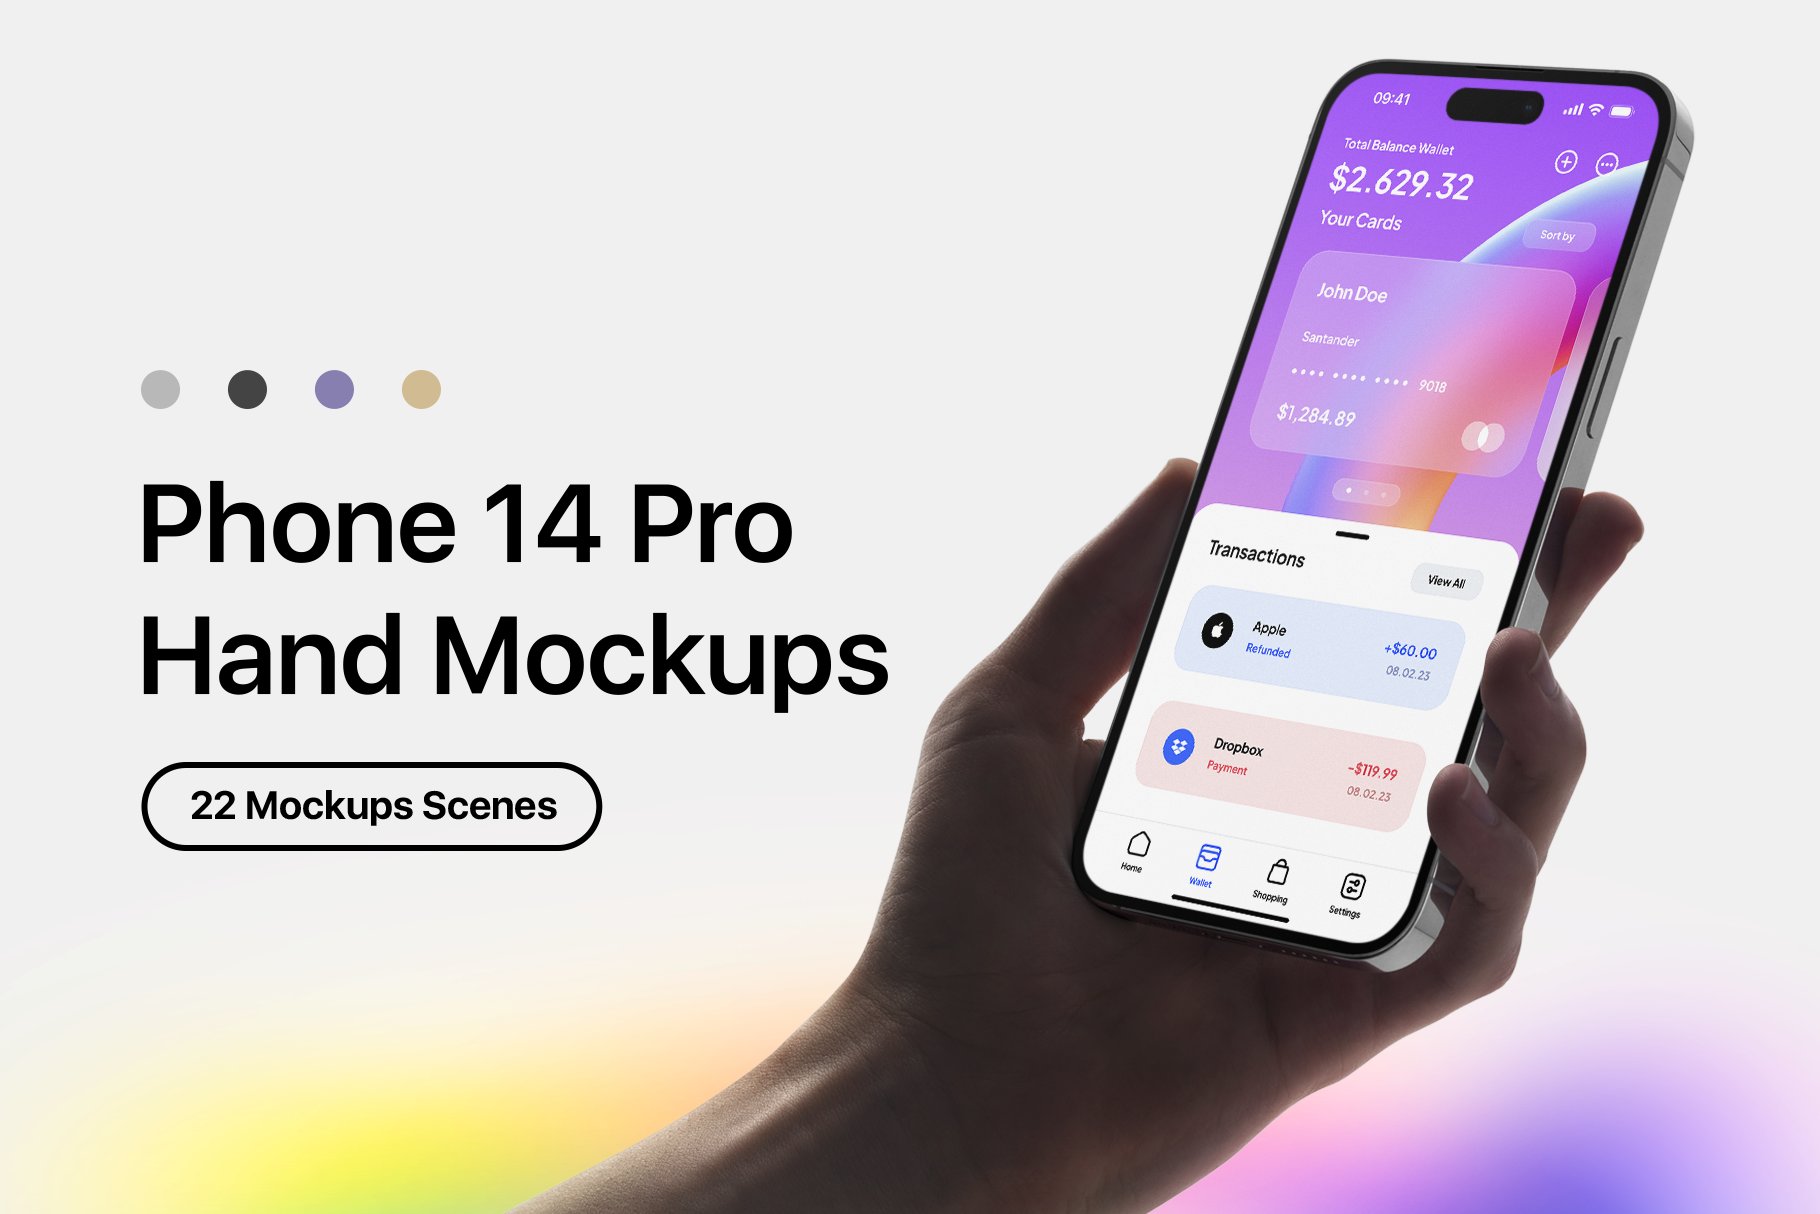 22 Phone 14 Pro In Hand Mockups cover image.